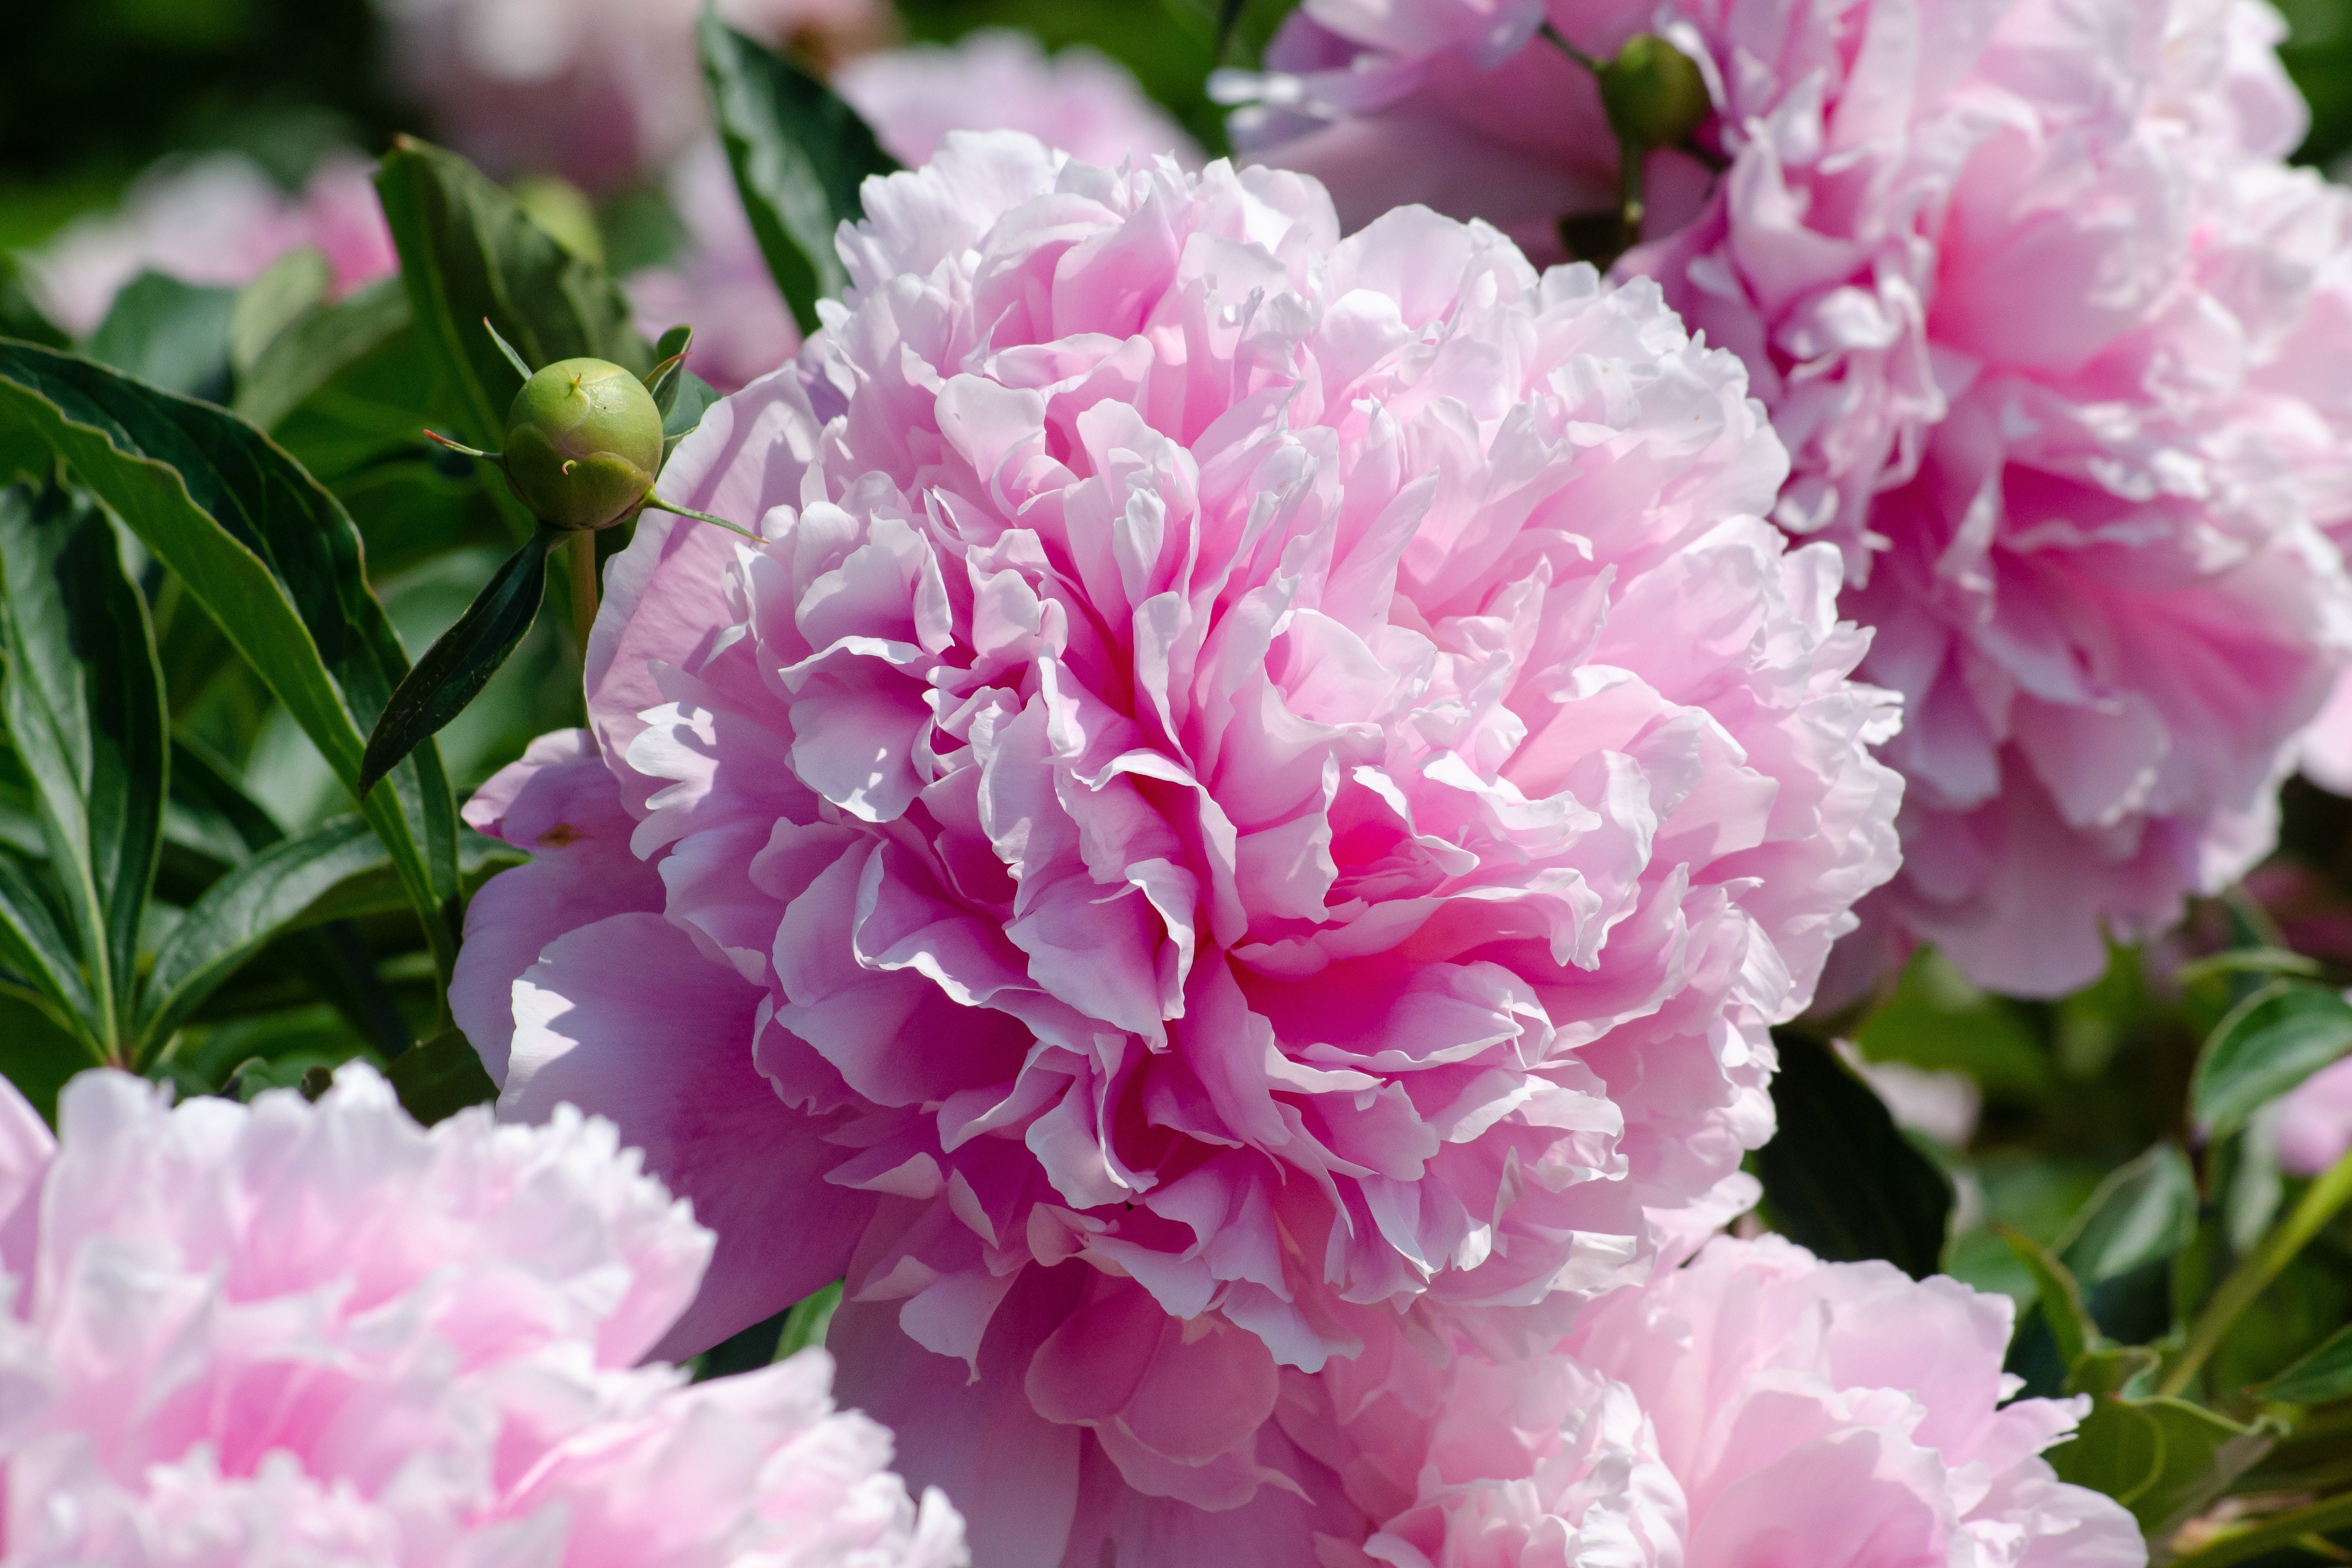 How To Grow and Care For Peonies in the Fall